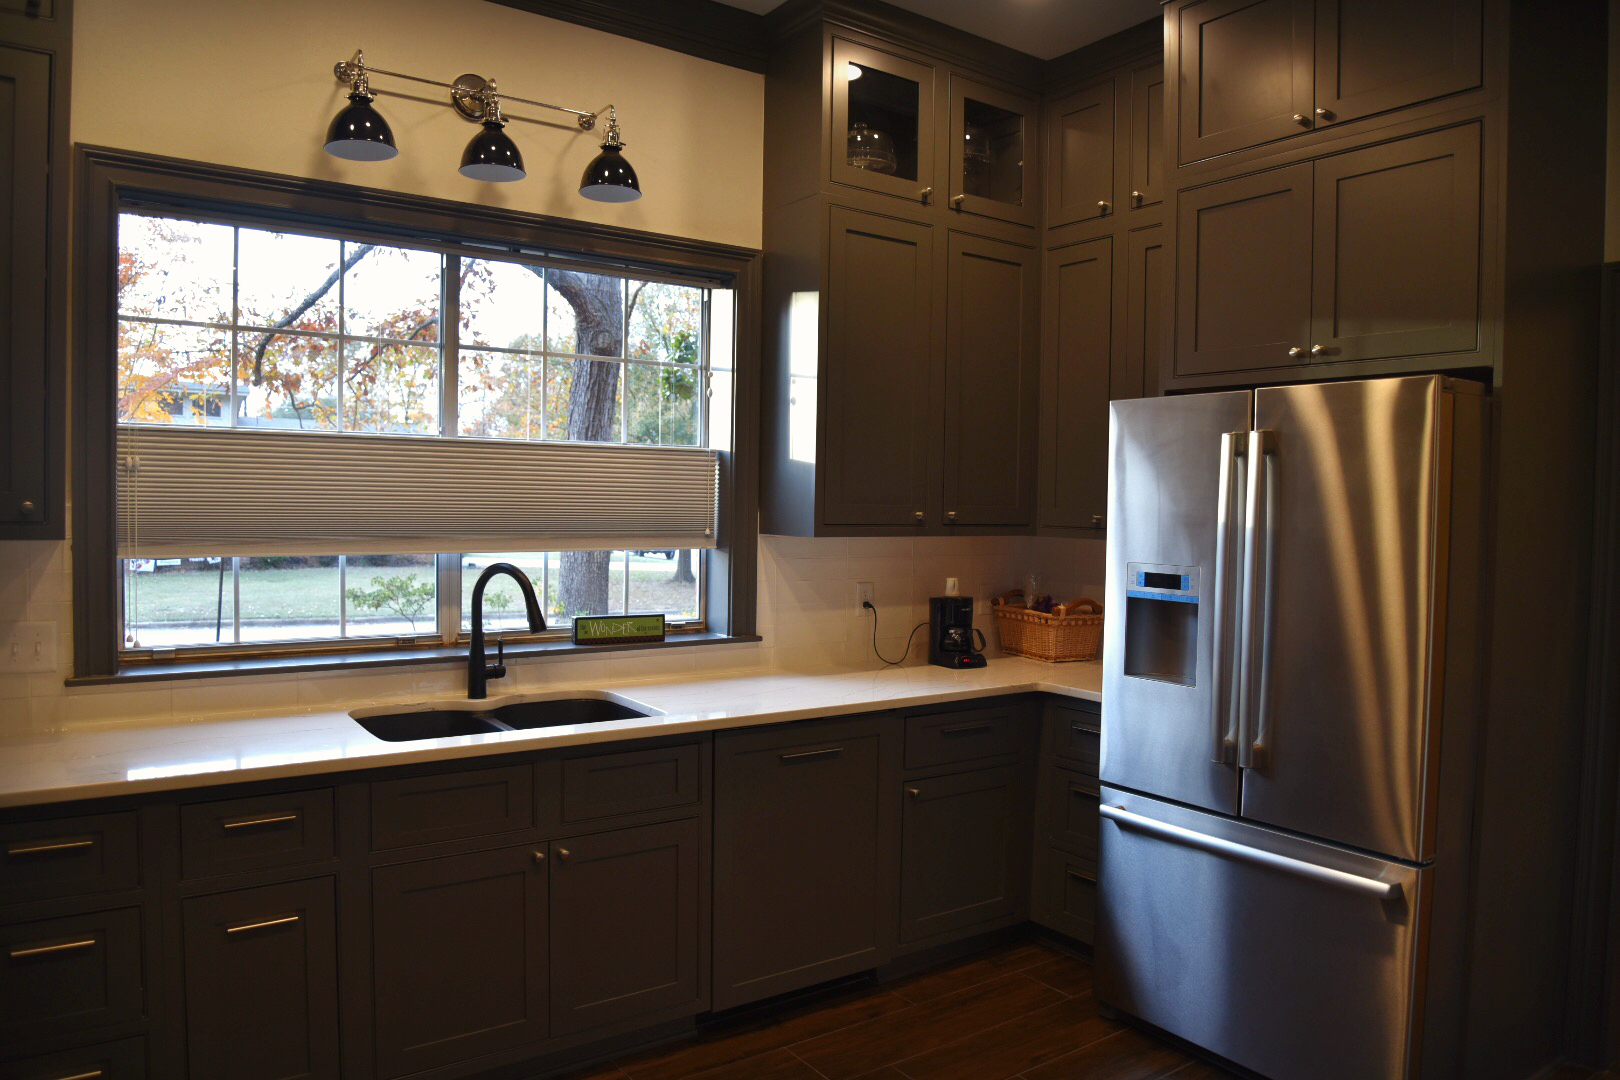   Bosch &nbsp;appliances,&nbsp; Cambria &nbsp;countertops, and Shiloh cabinetry are included in this local kitchen project... 